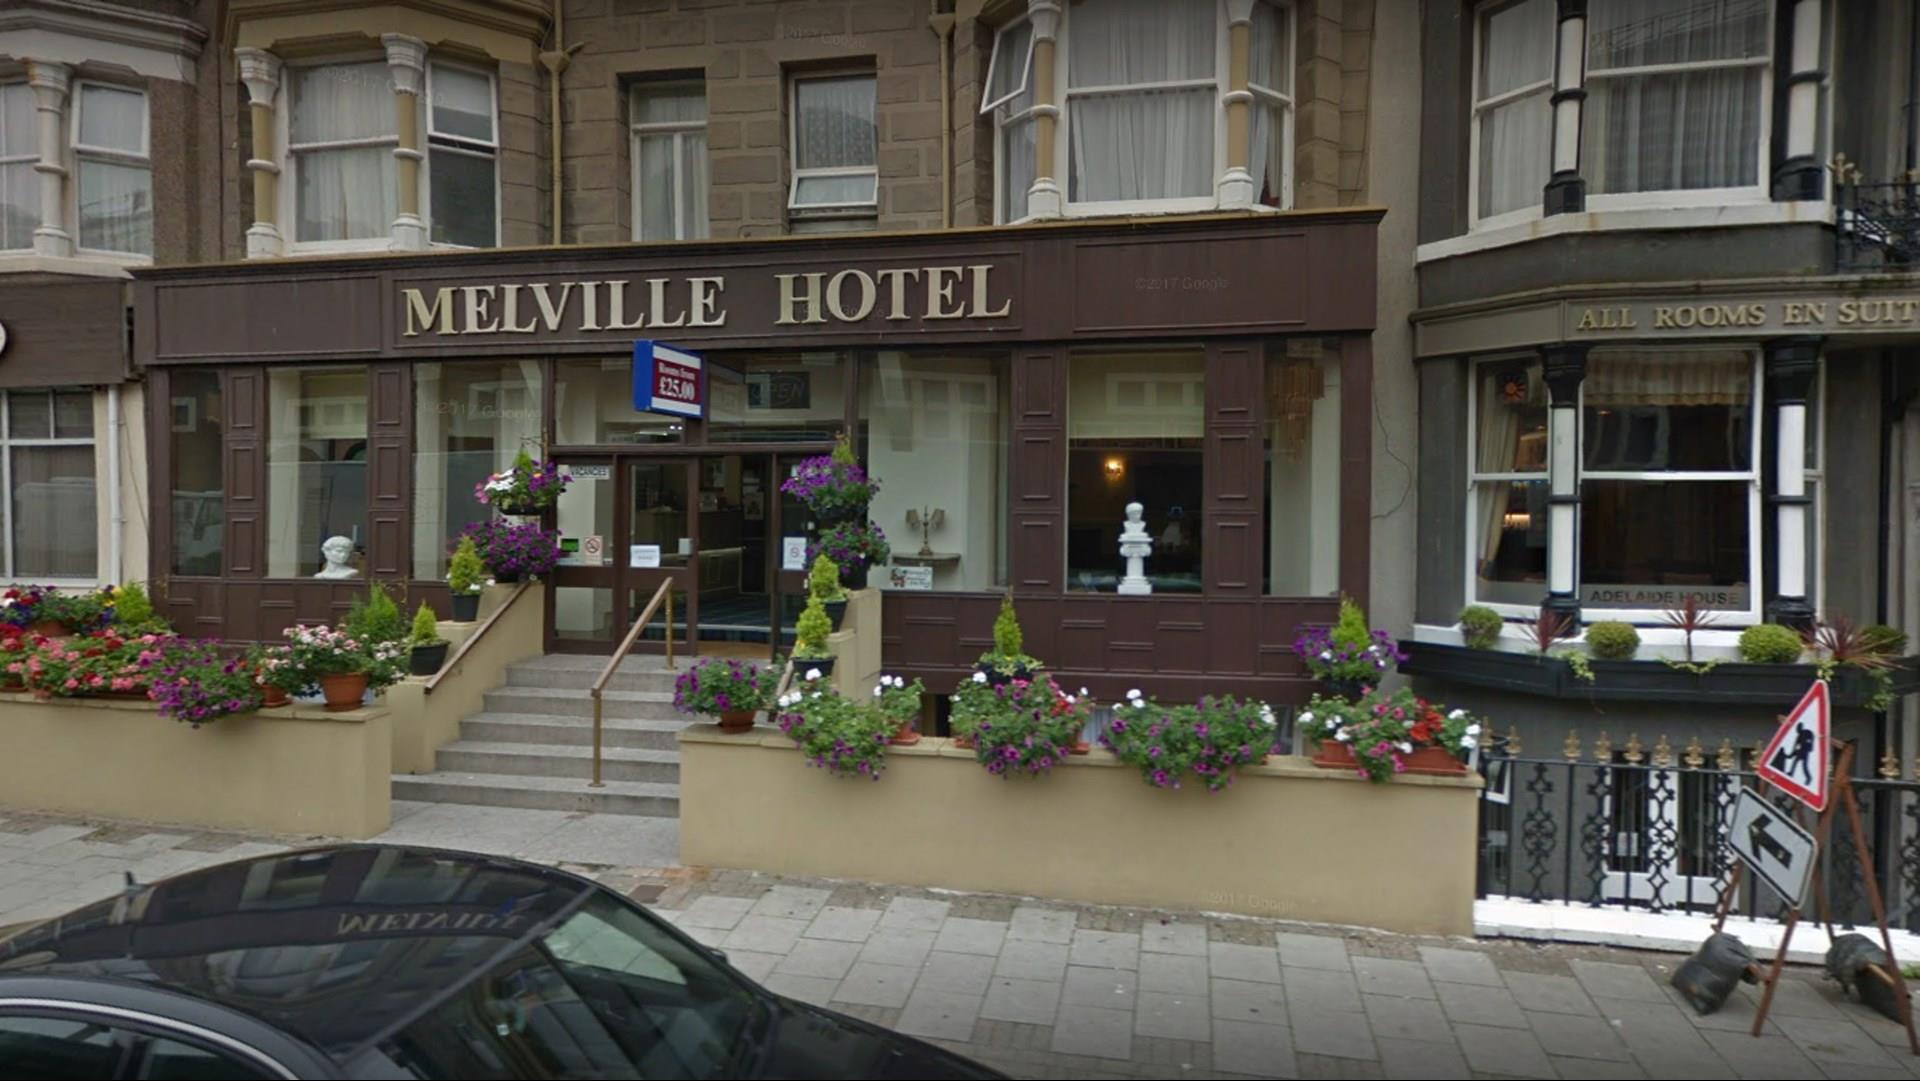 The Melville Hotel in London, GB1